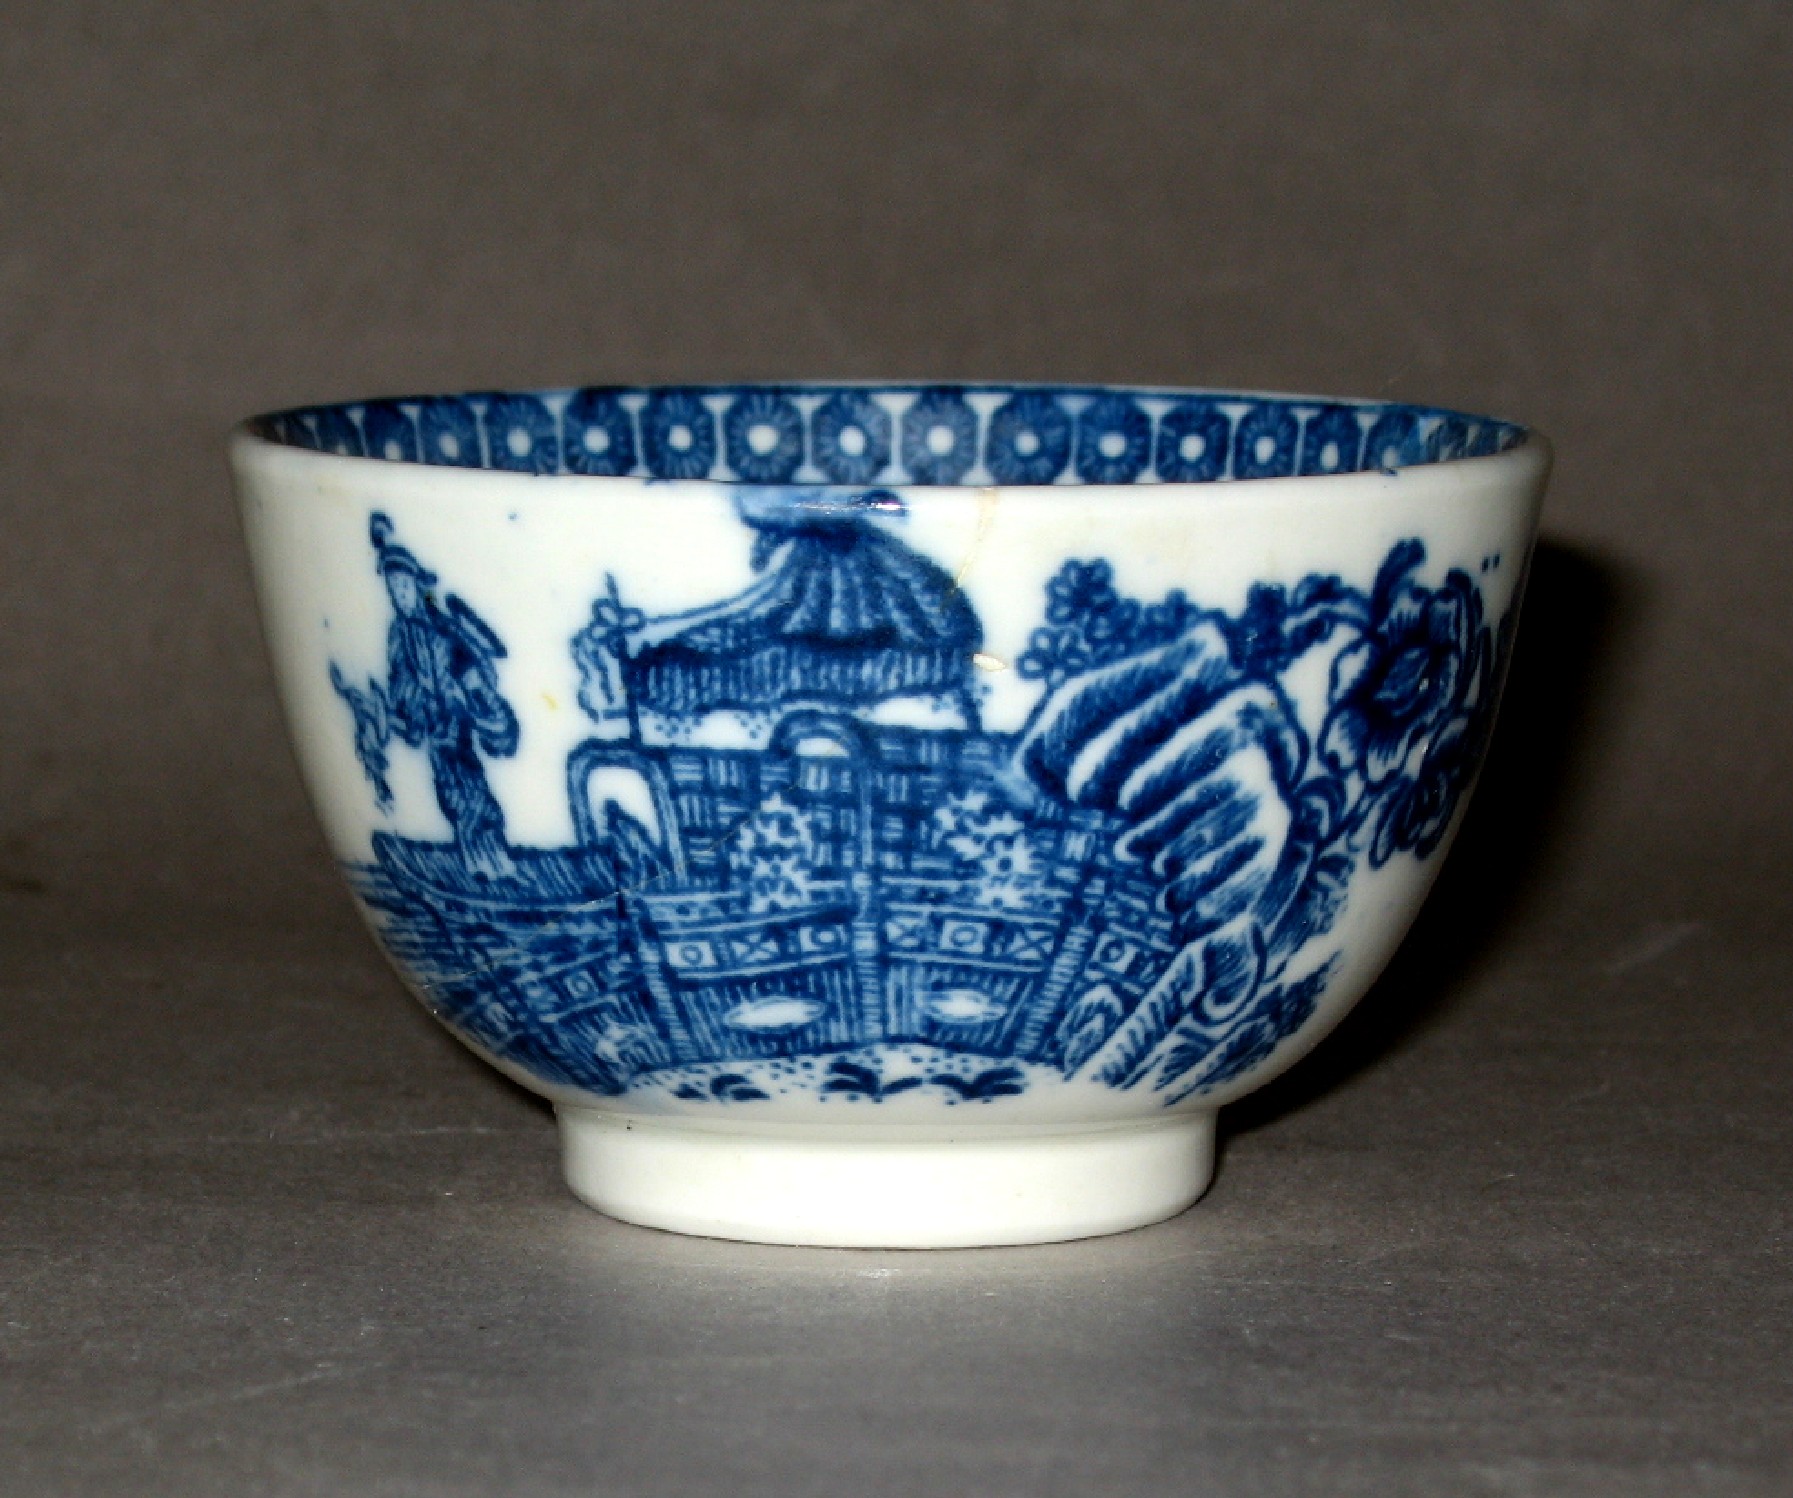 1979.0041 Caughley blue and white porcelain teabowl (side 1)